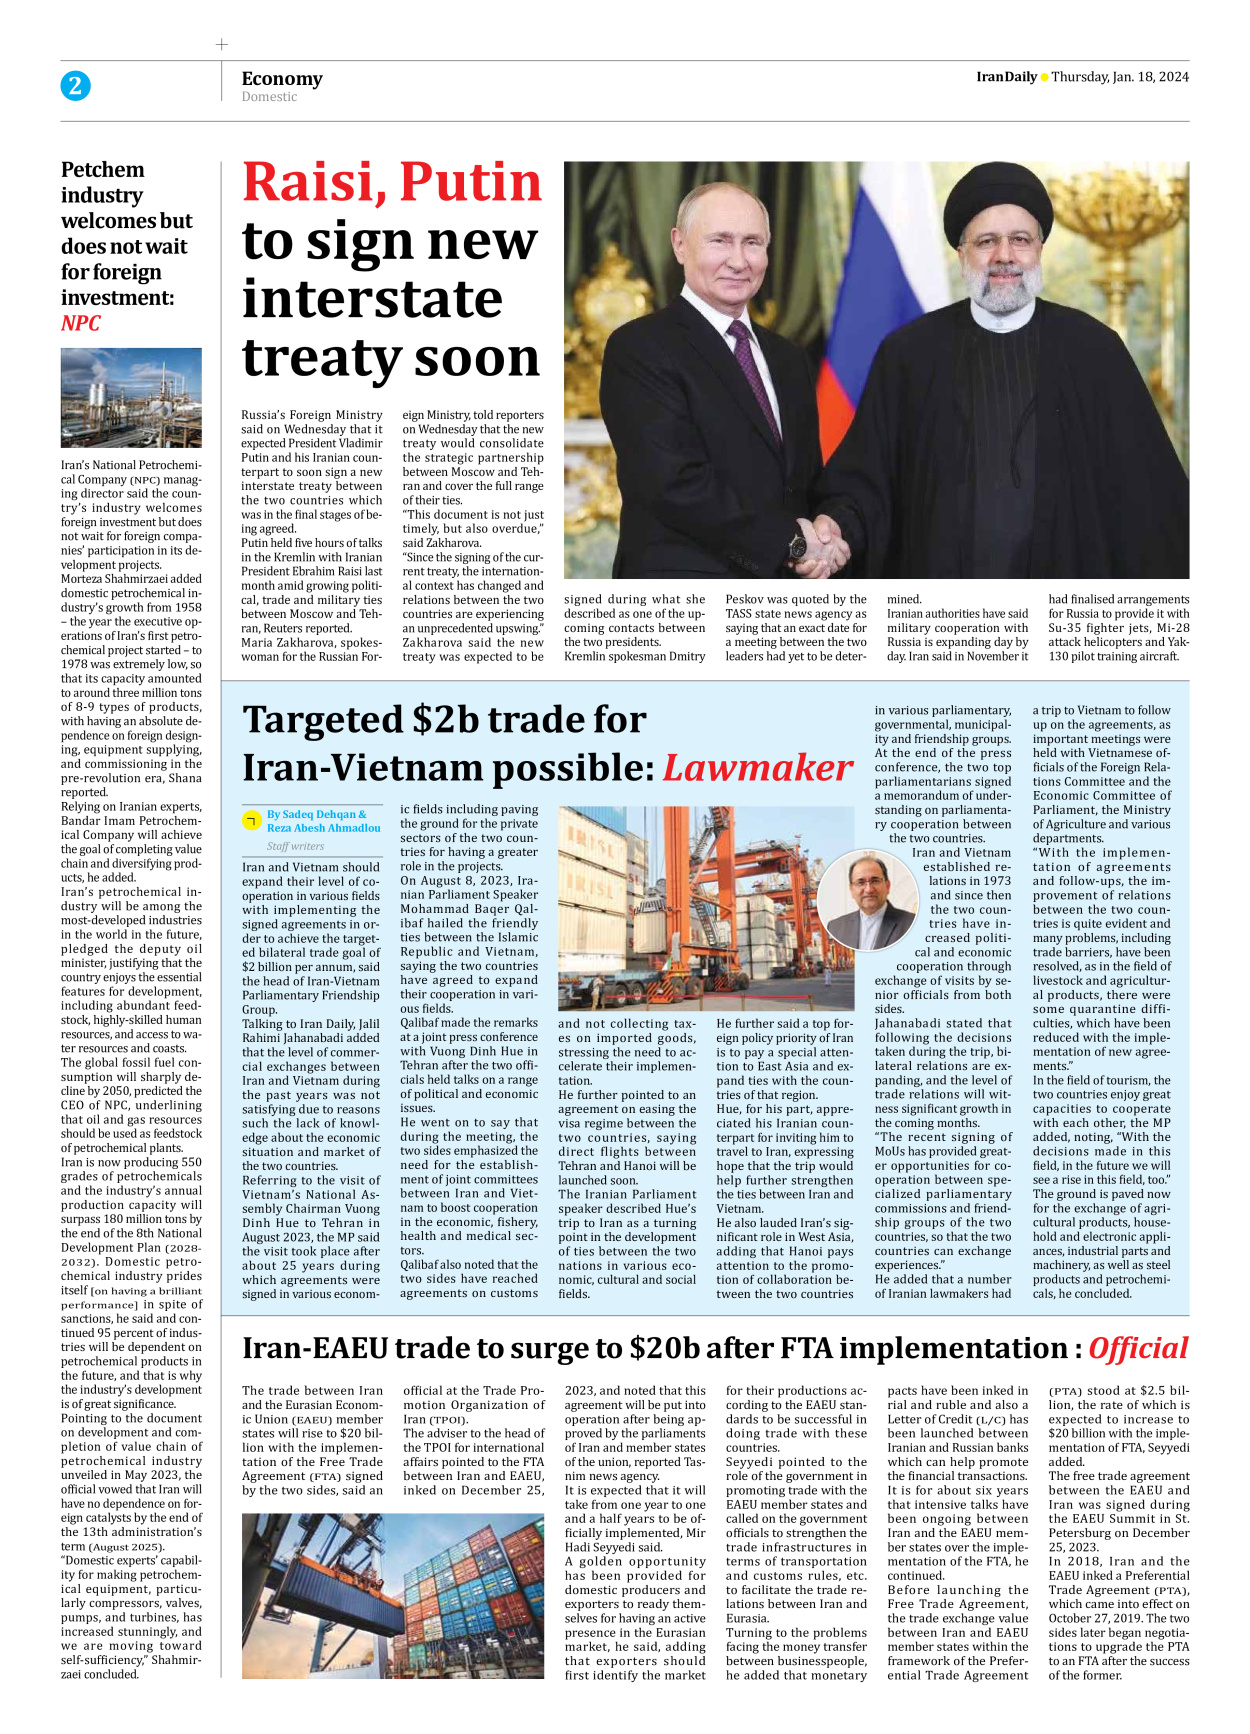 Iran Daily - Number Seven Thousand Four Hundred and Eighty Eight - 18 January 2024 - Page 2